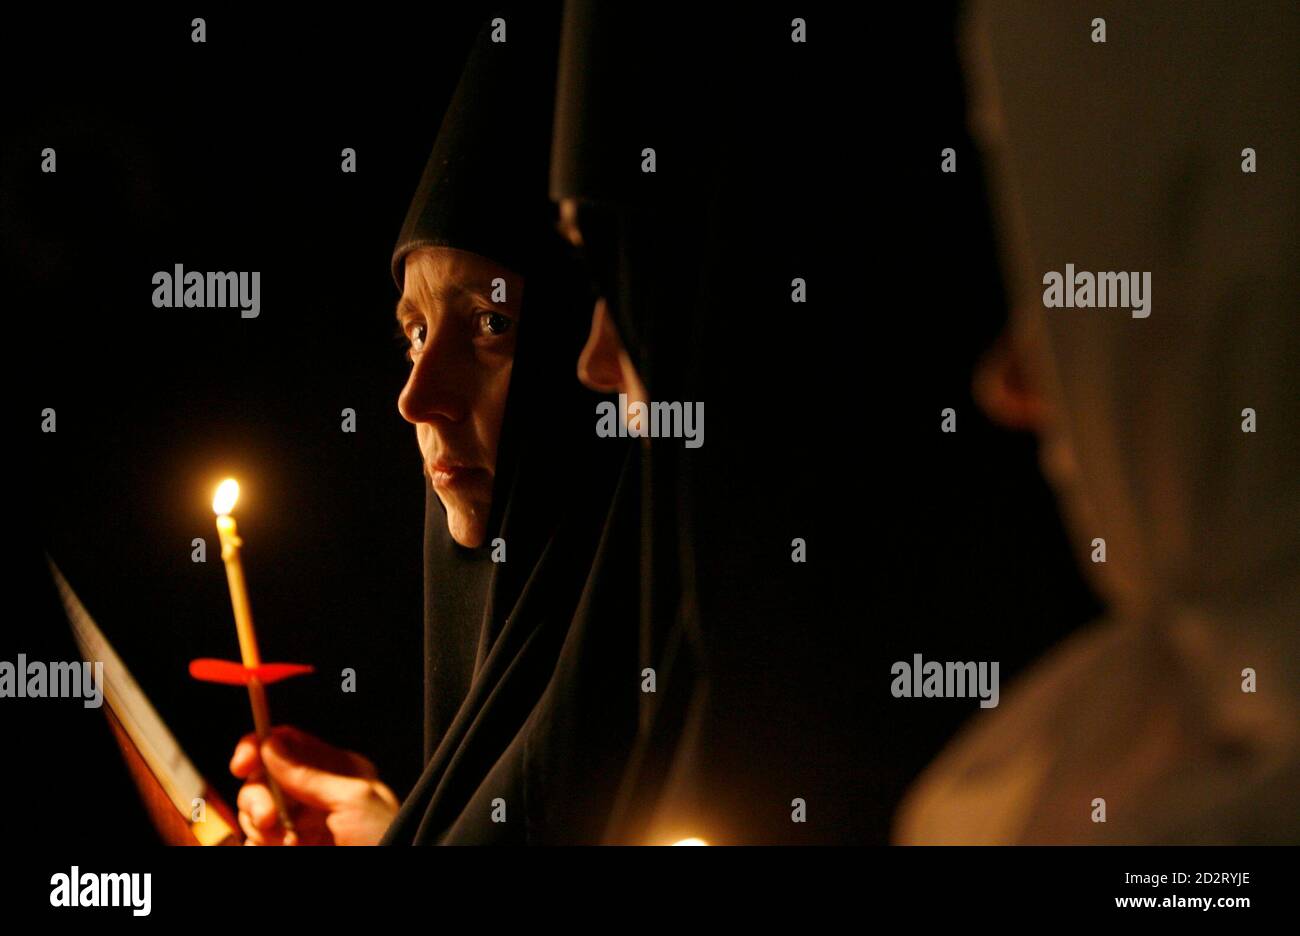 Nuns of Saint-Nickolas monastery attend an Orthodox Easter mass in the town of Maloyaroslavets, some 130 km (81 miles) south-west of Moscow early April, 27 2008. REUTERS/Denis Sinyakov   (RUSSIA) Stock Photo